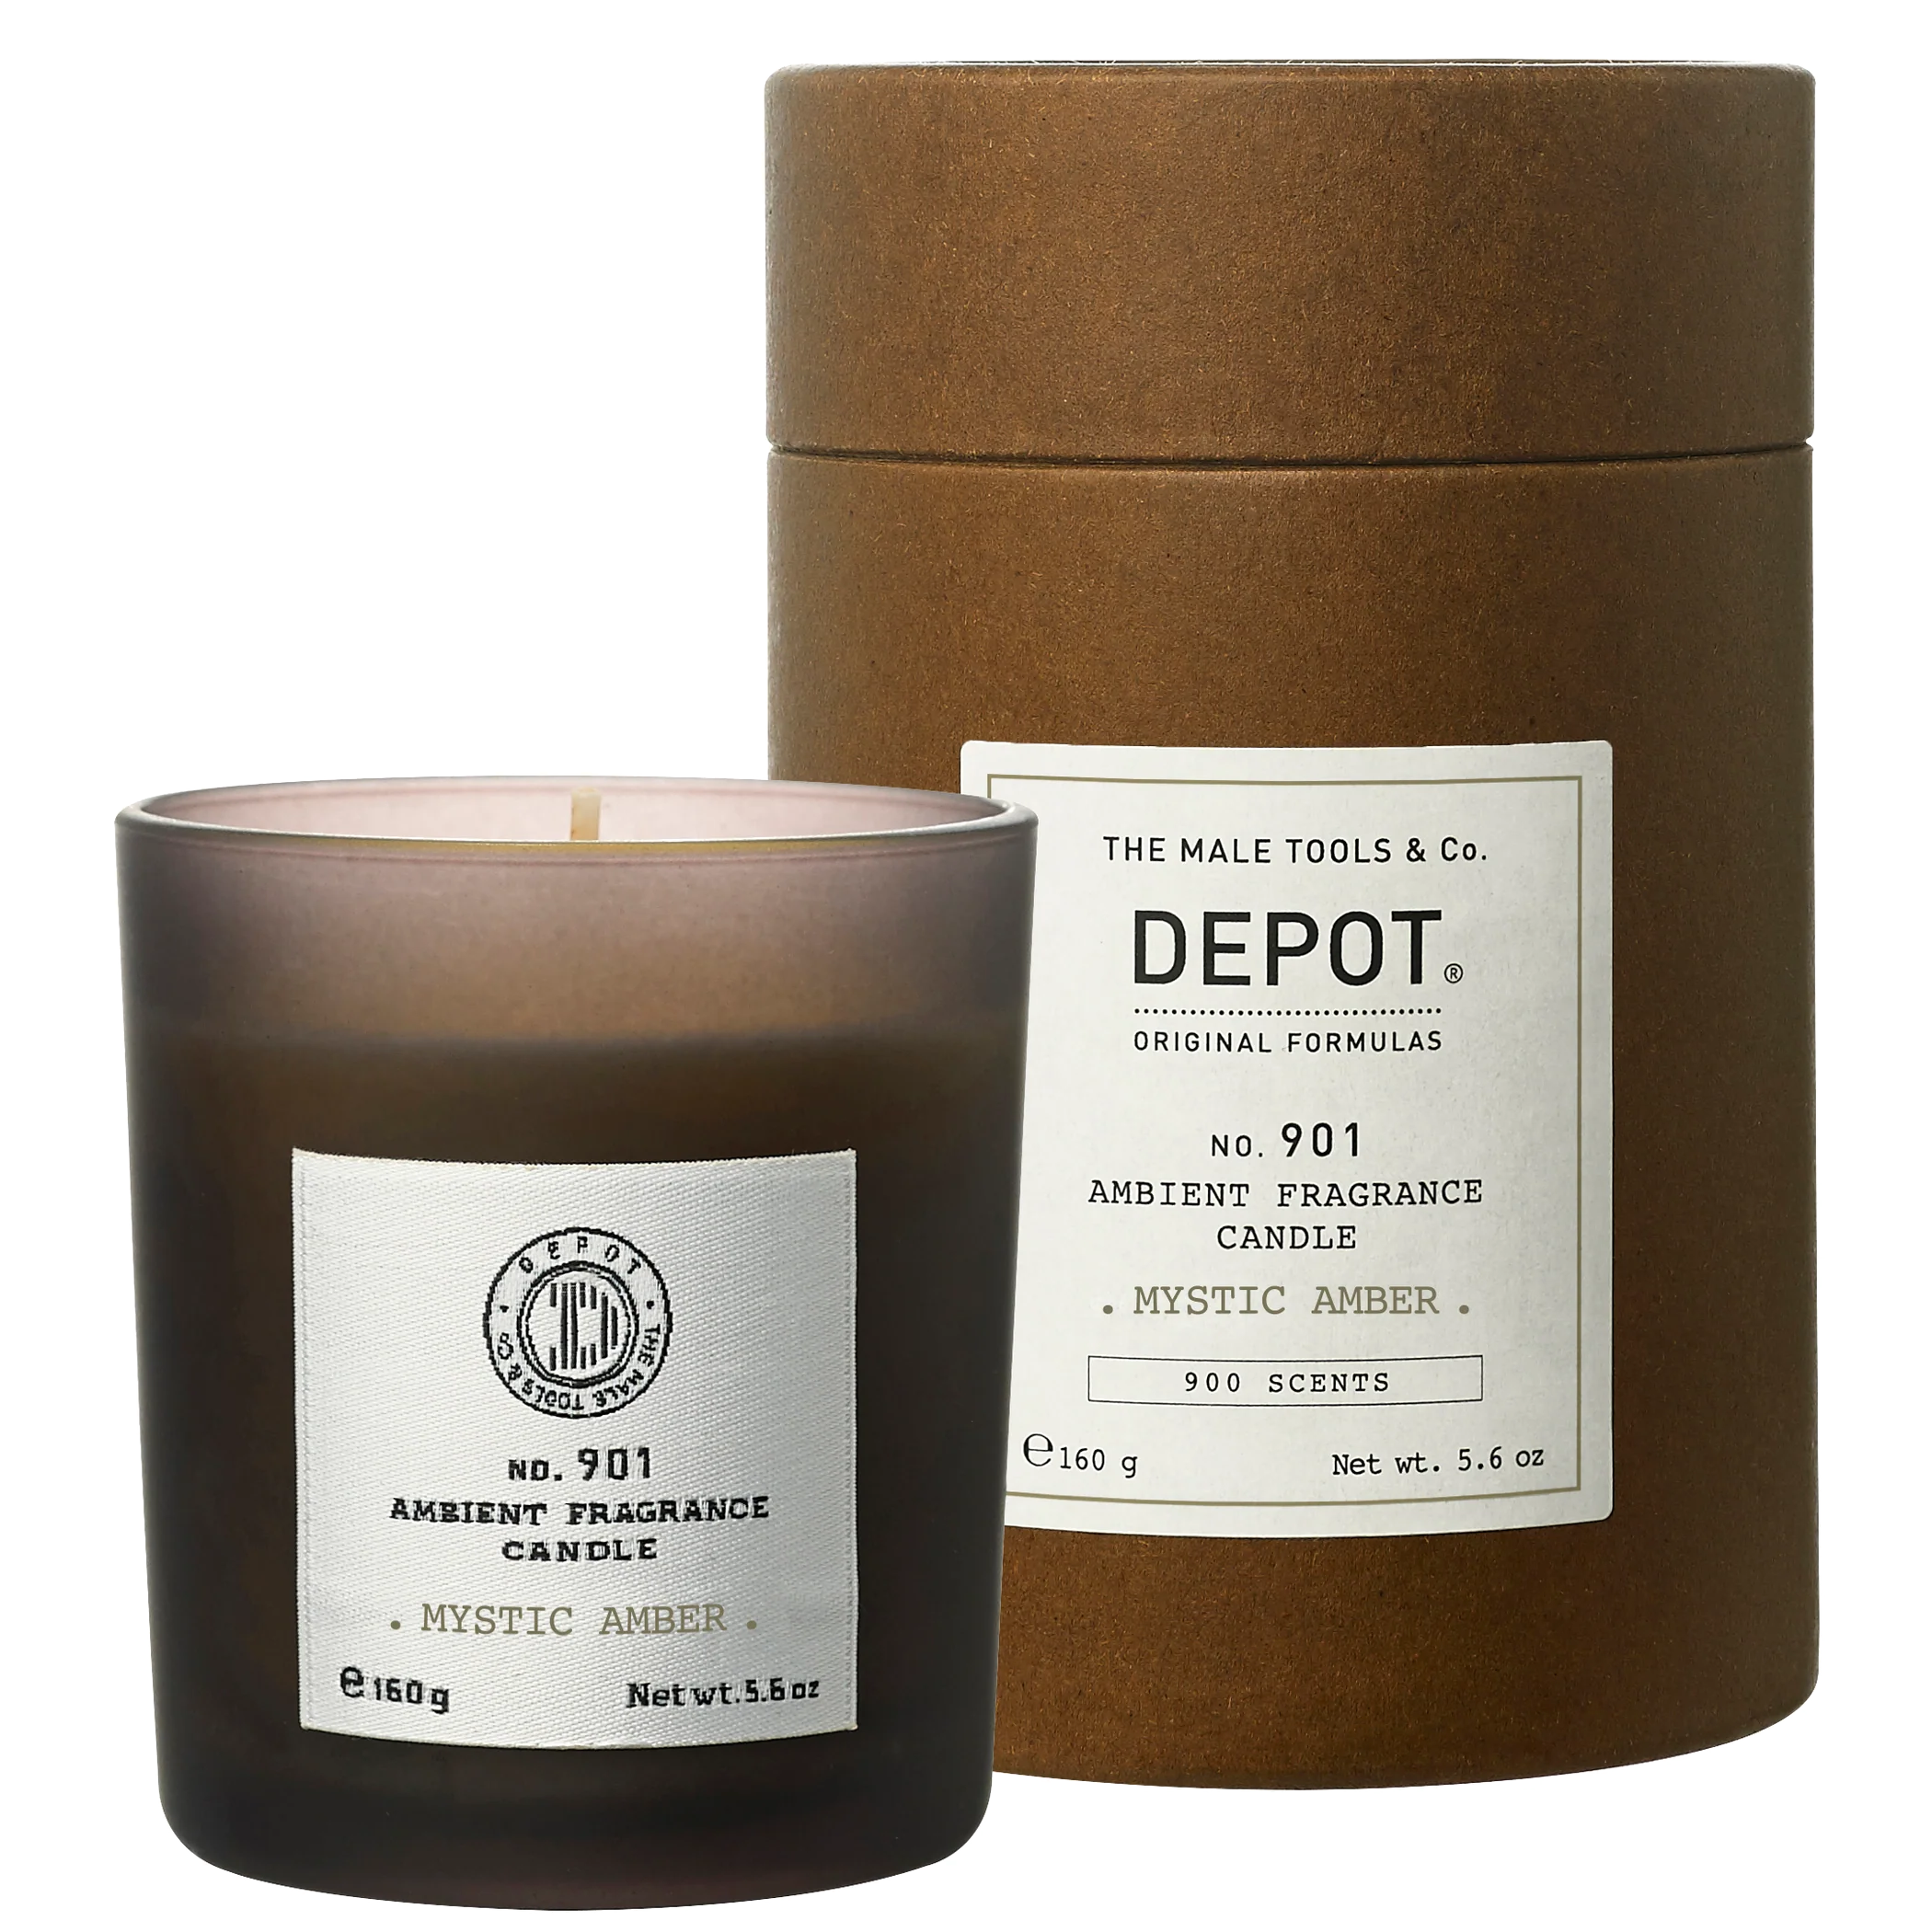 Depot No. 901 - Ambient Fragrance Candle